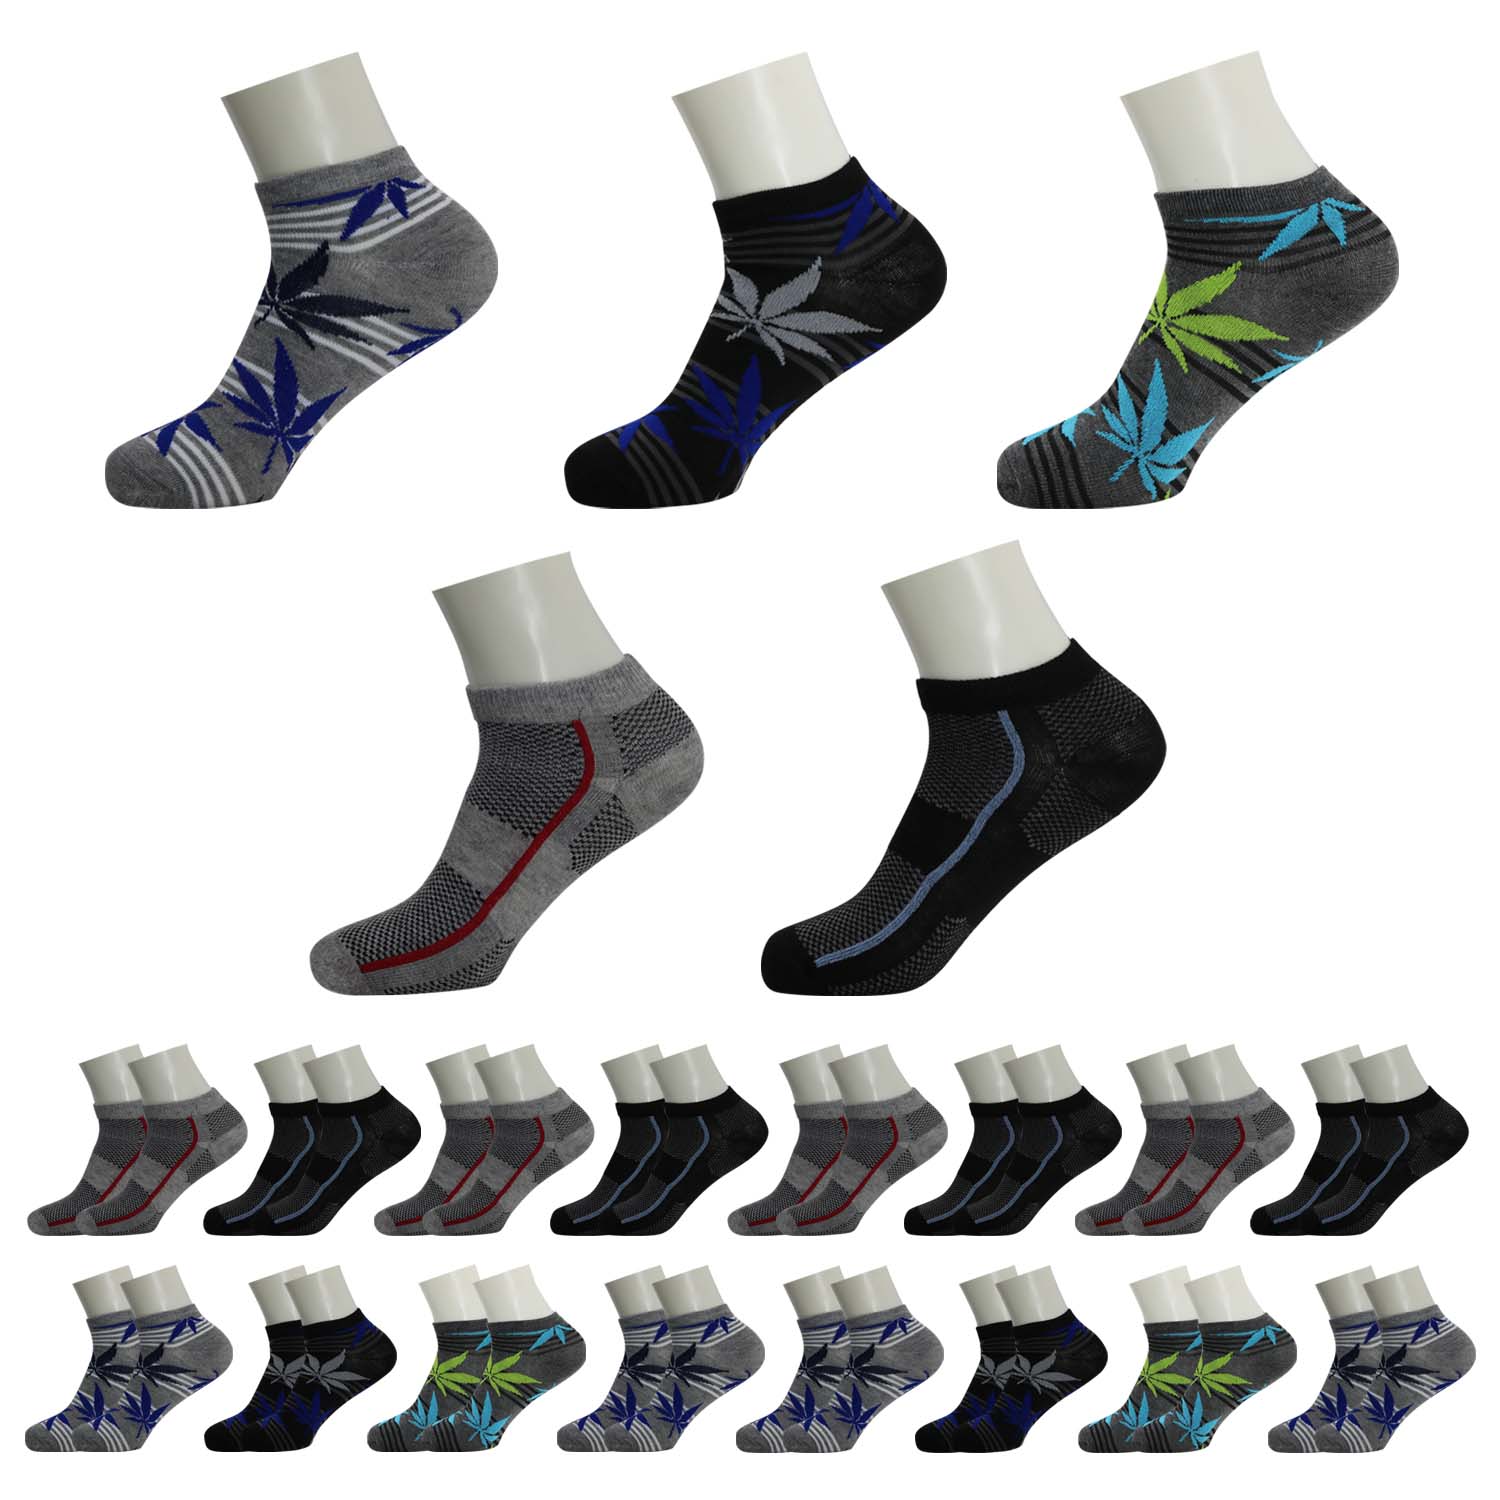 144 Pairs - Wholesale Ankle Bulk Socks - Fits Sizes 9-11- Assorted Colors/Patterns